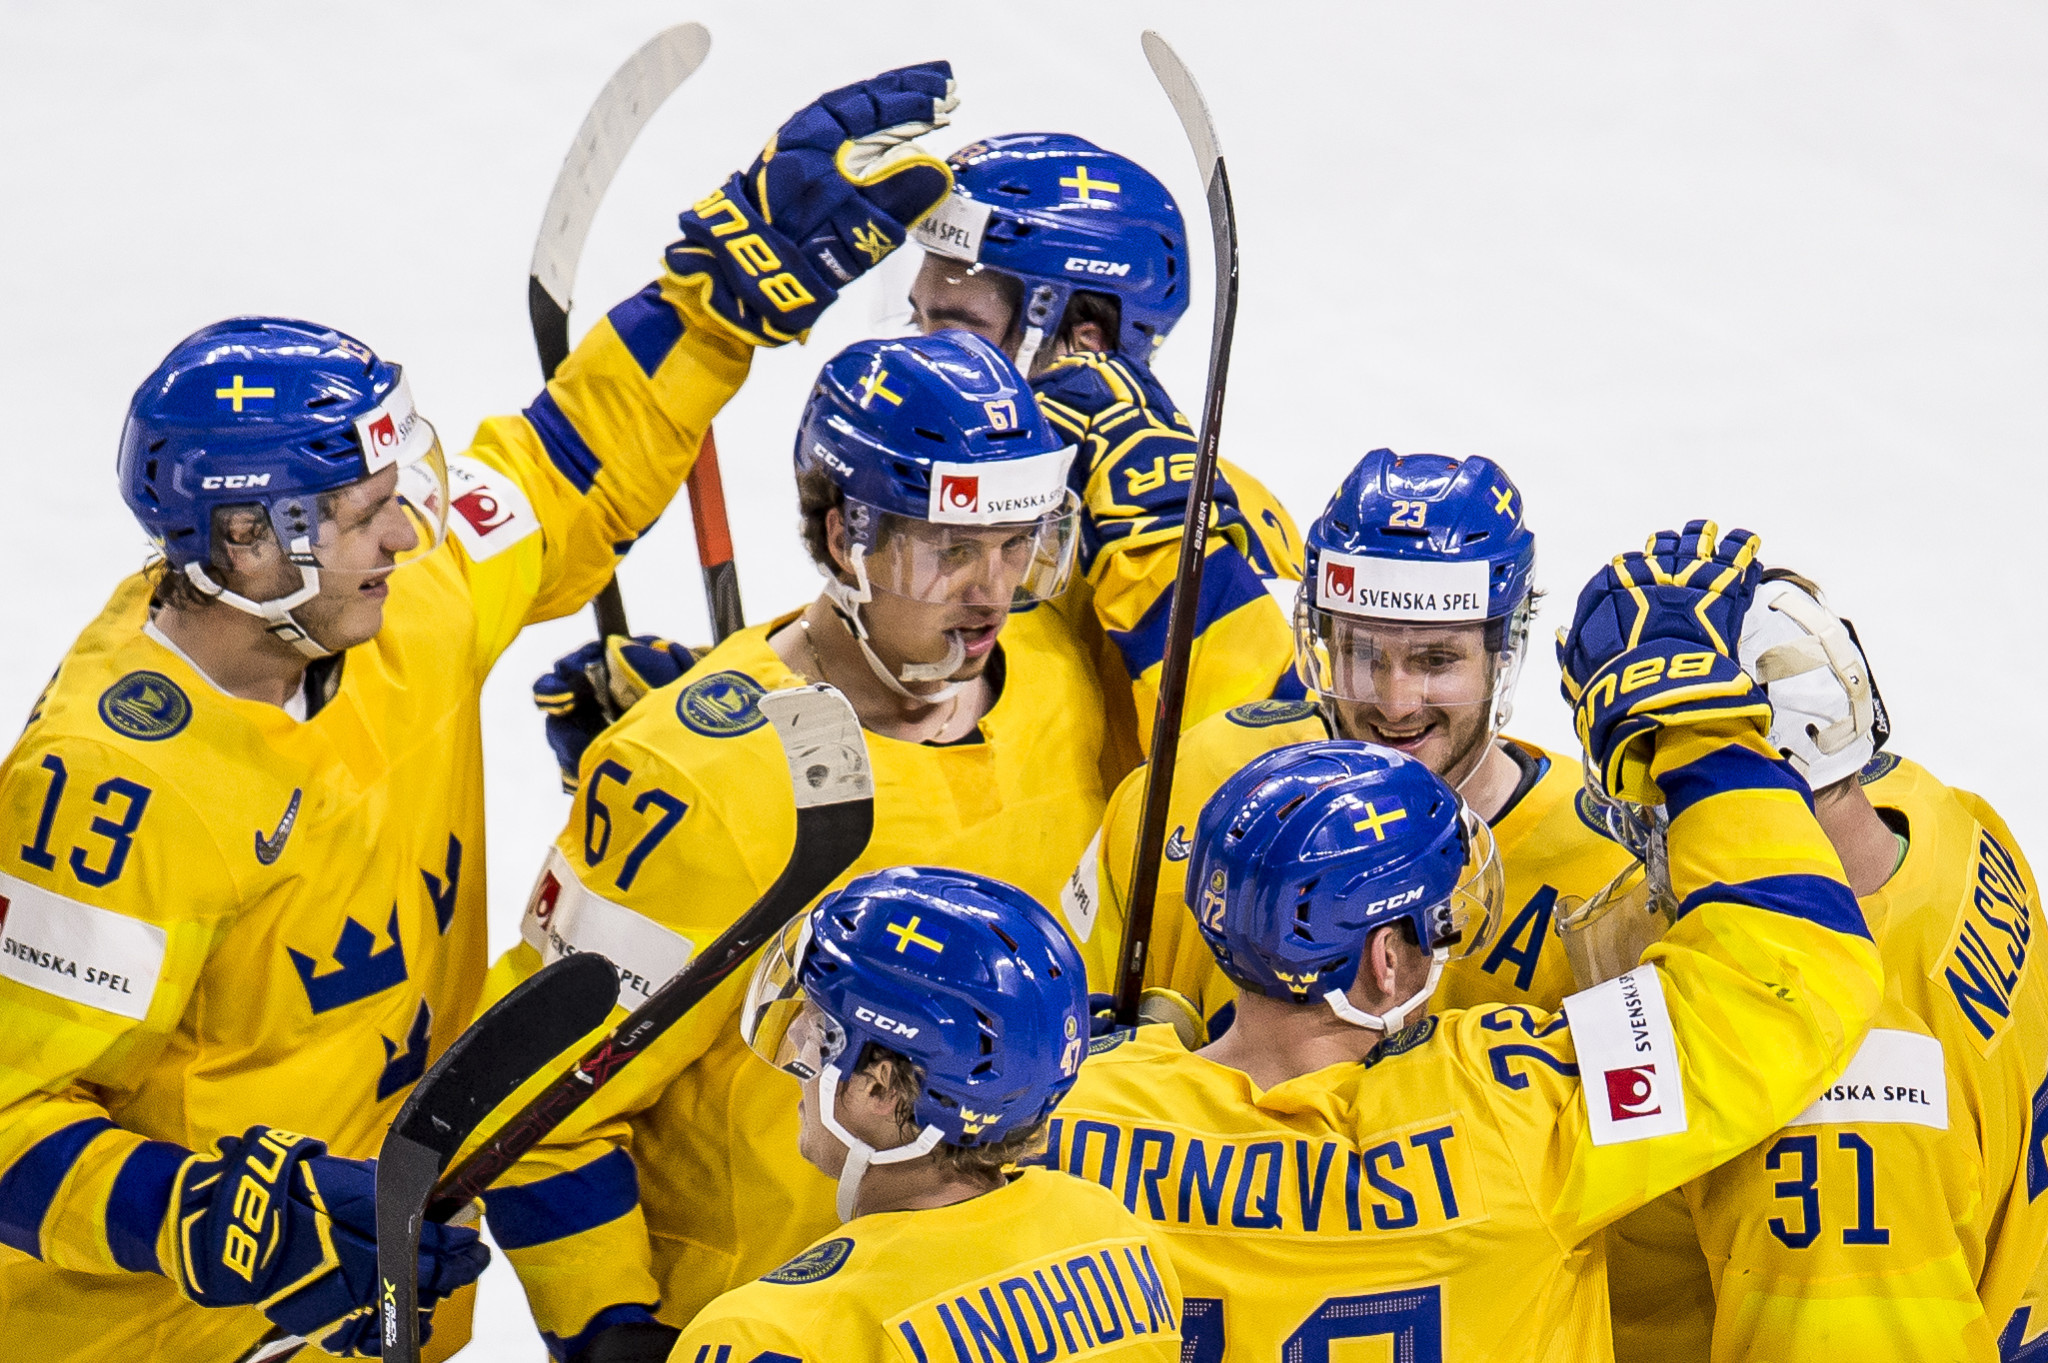 Sweden came from behind to beat Russia in the final round of group matches at the IIHF World Championship ©Getty Images